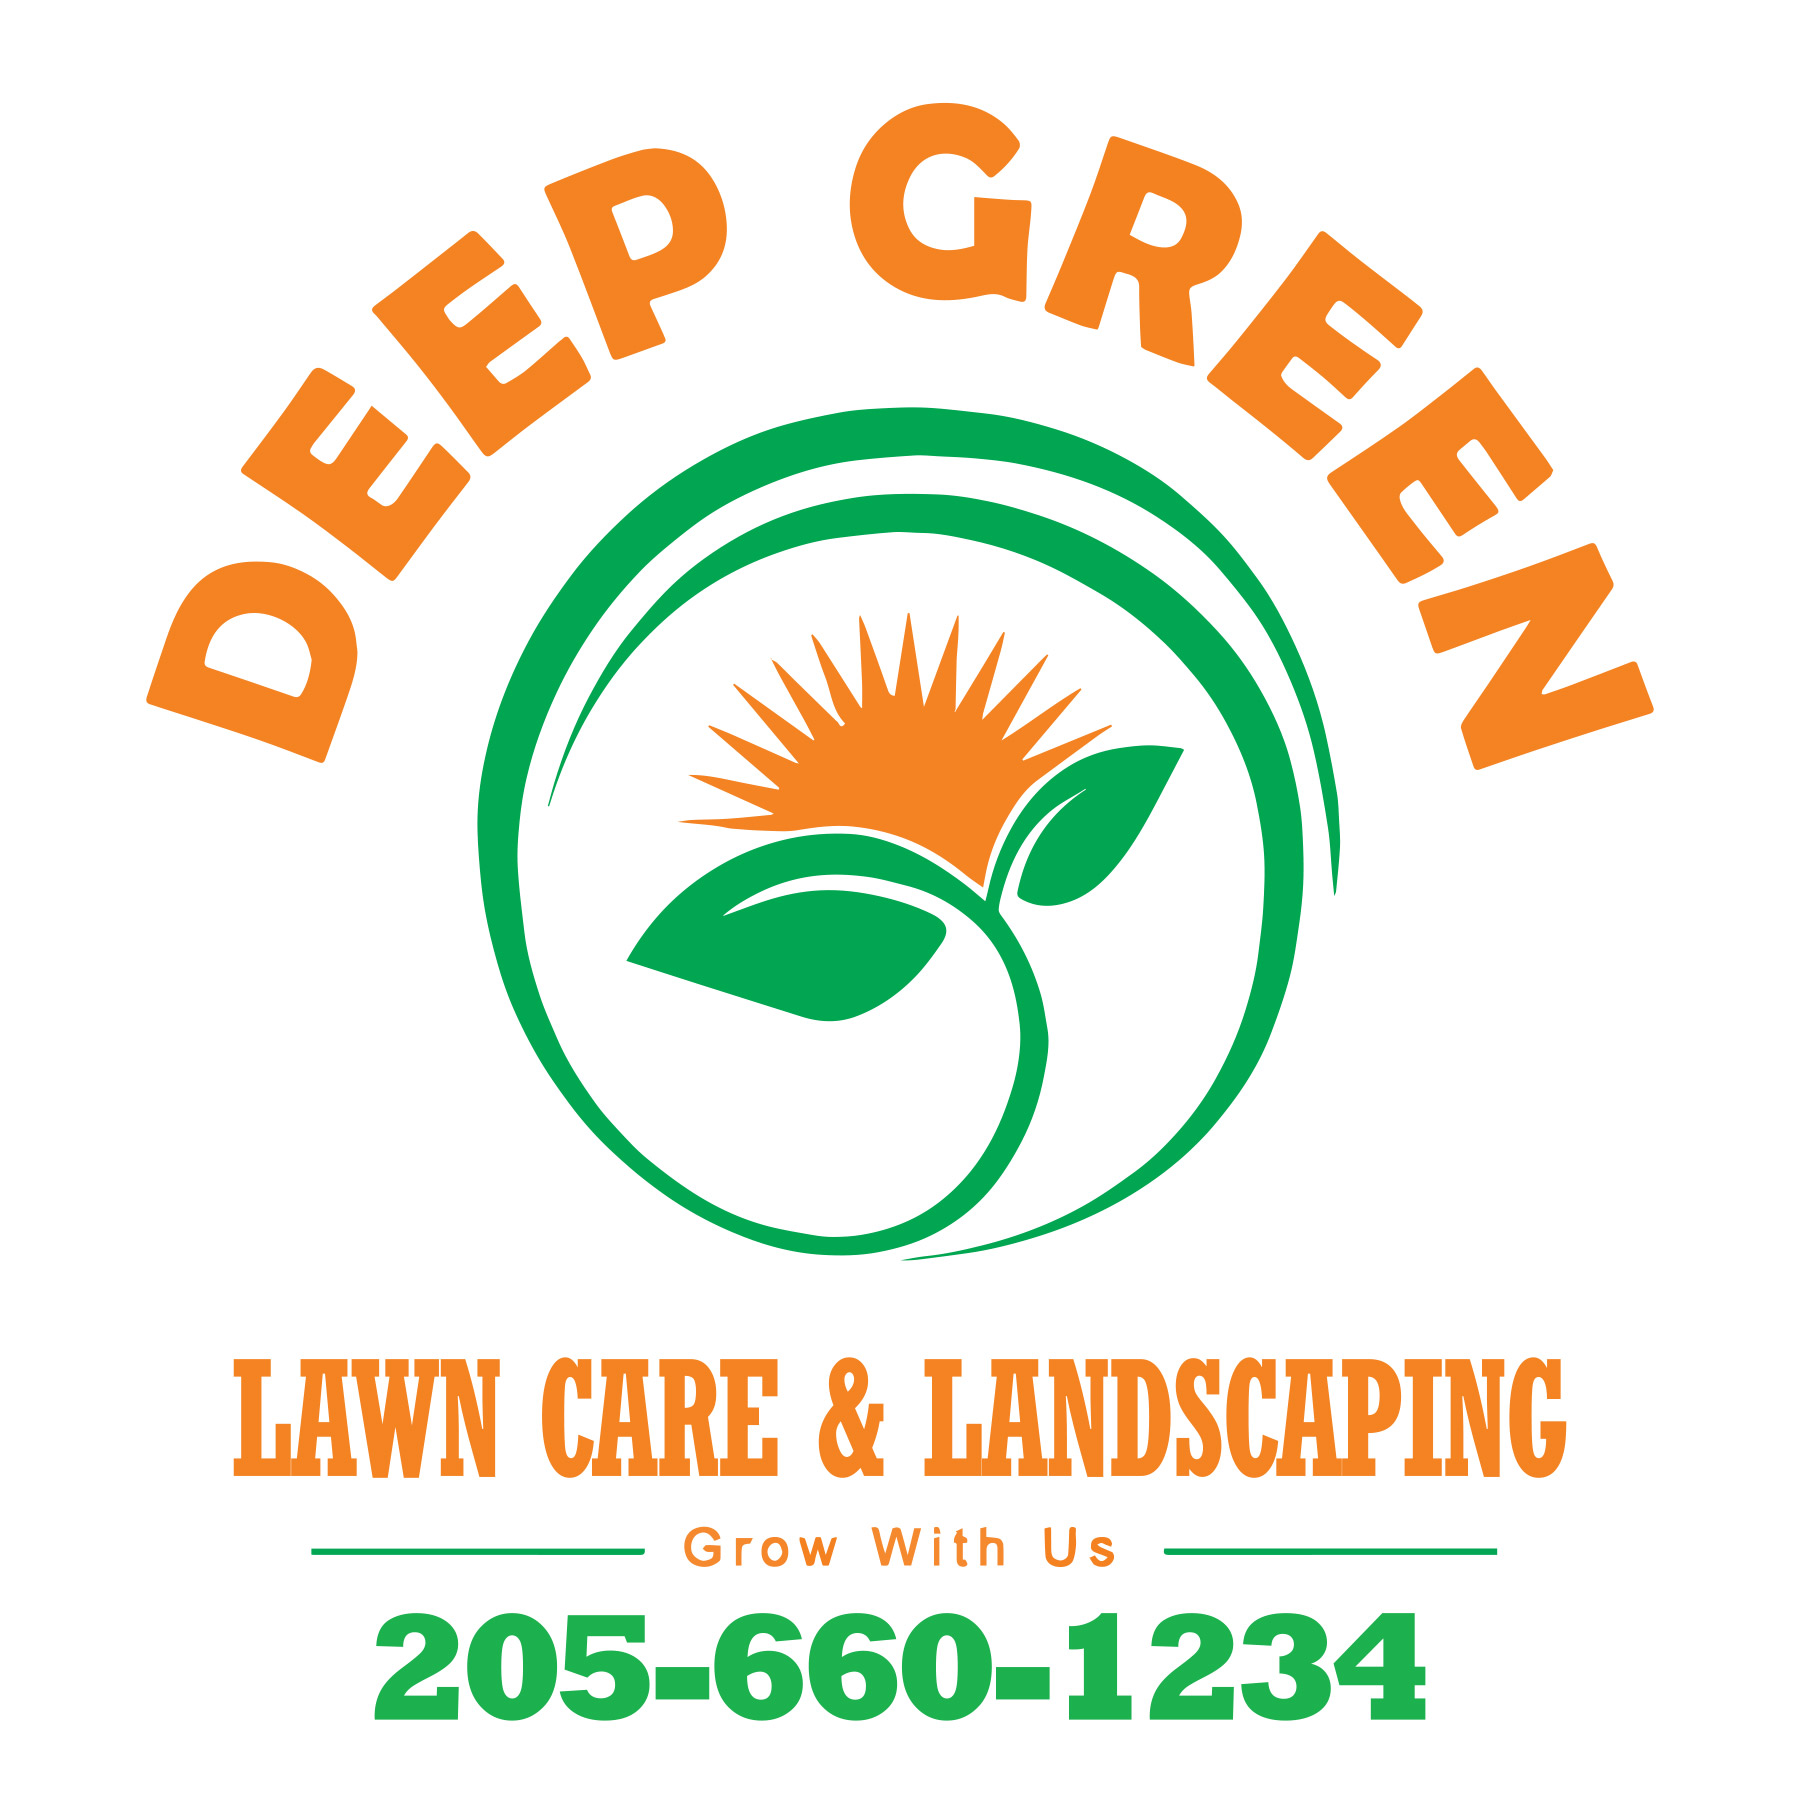 Deep Green Lawn Care - Landscaping, Weed Control, & Lawn Maintenance